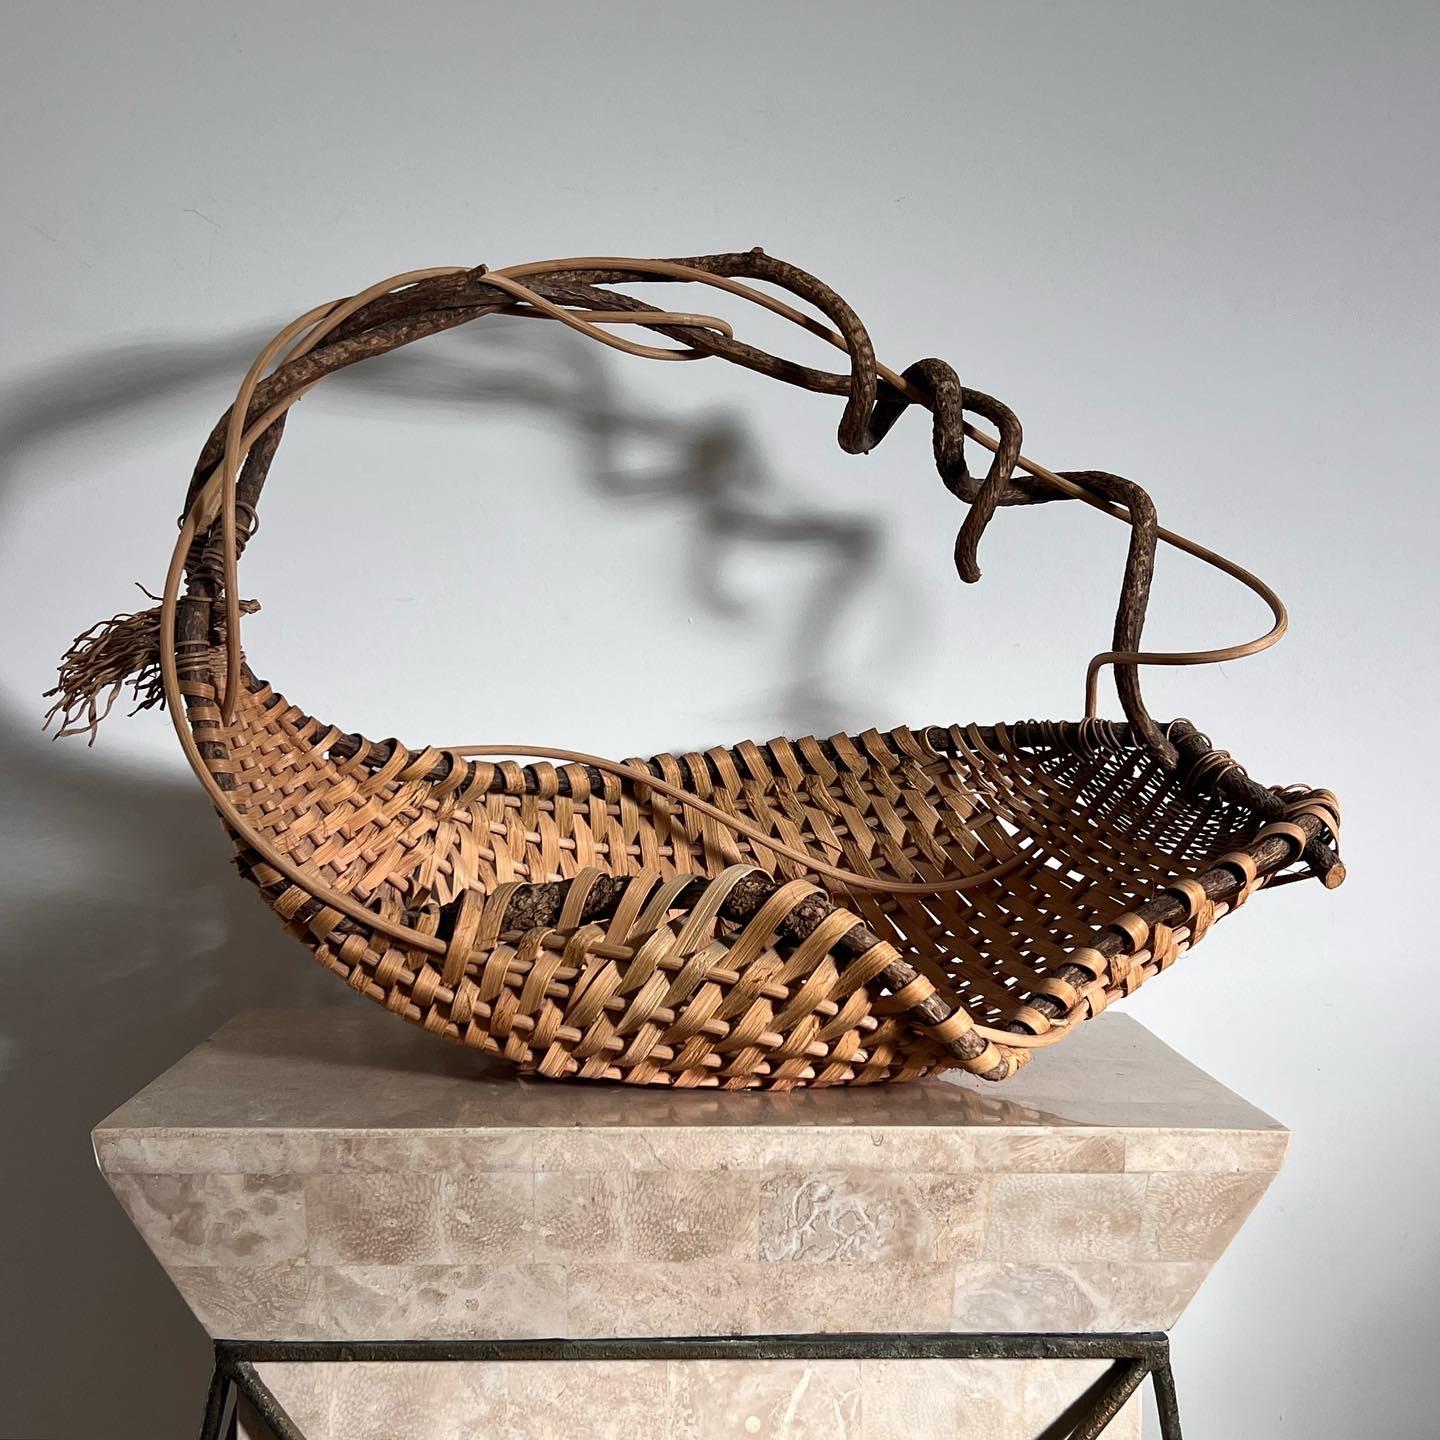 Organic Modern Vintage Handwoven Wicker and Wood Decorative Basket by Artist, Late 20th Century